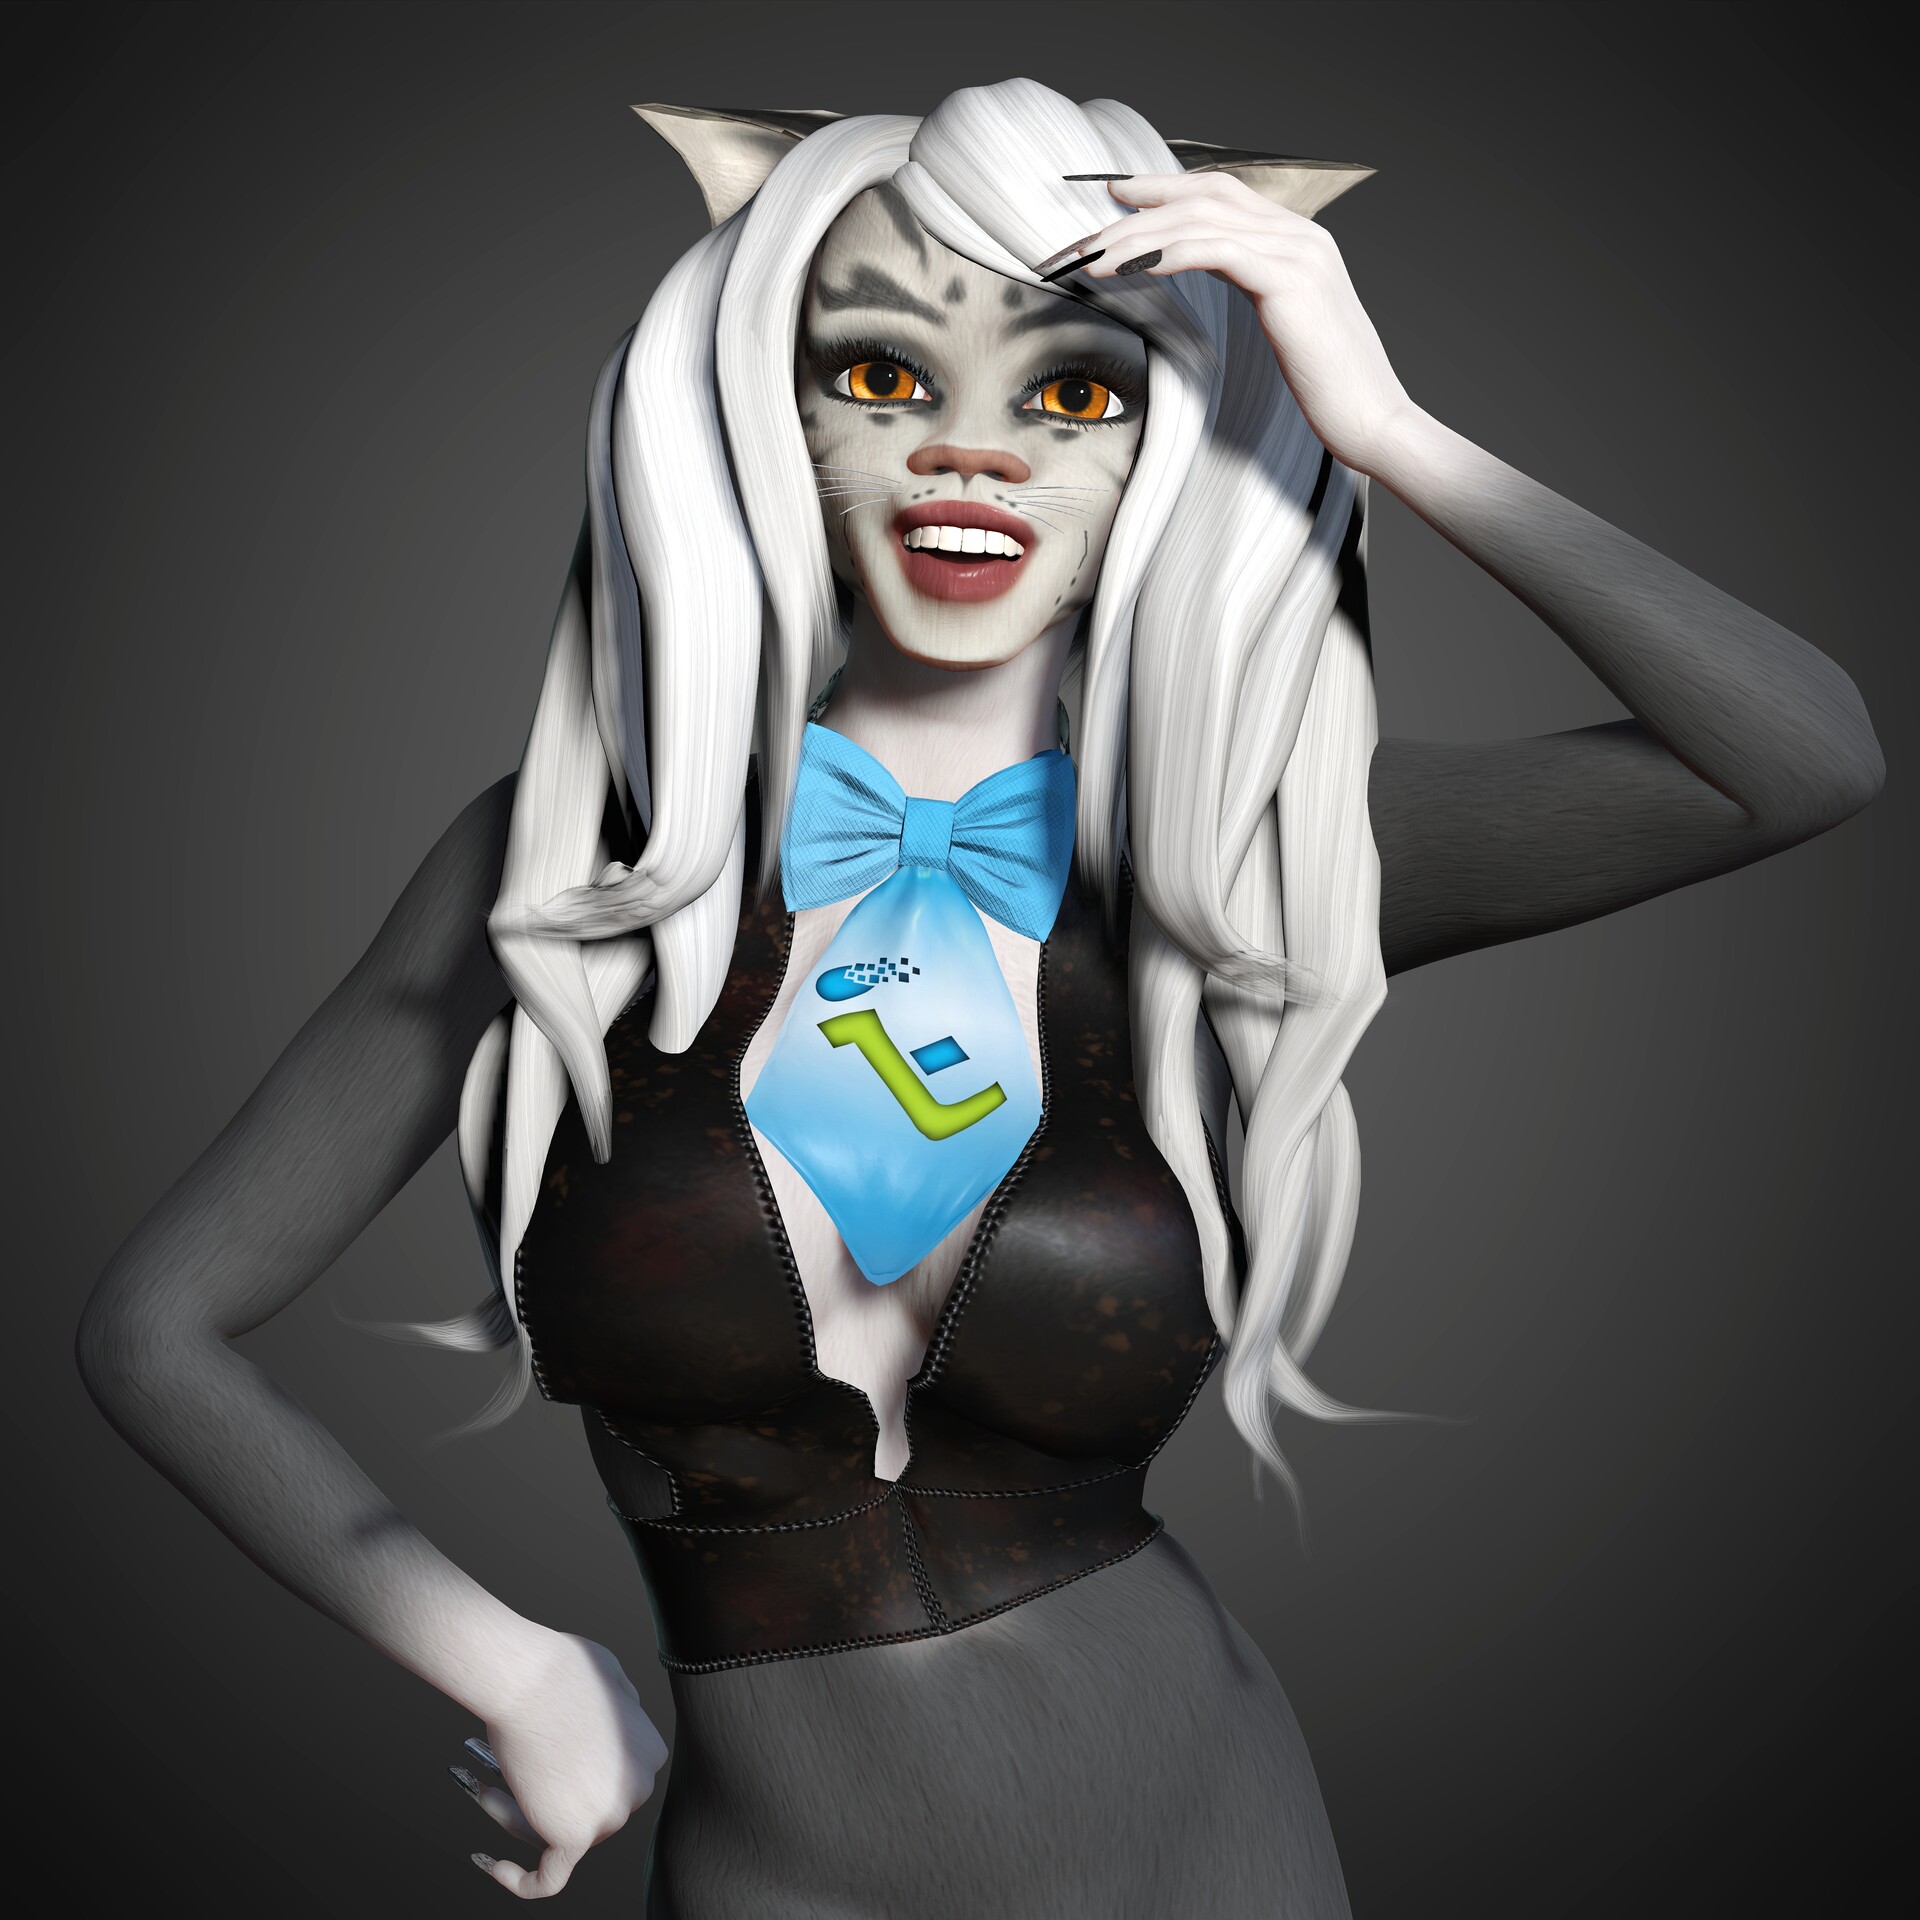 ArtStation - 3D Cartoon sexy woman cat for TechLevitate for video game